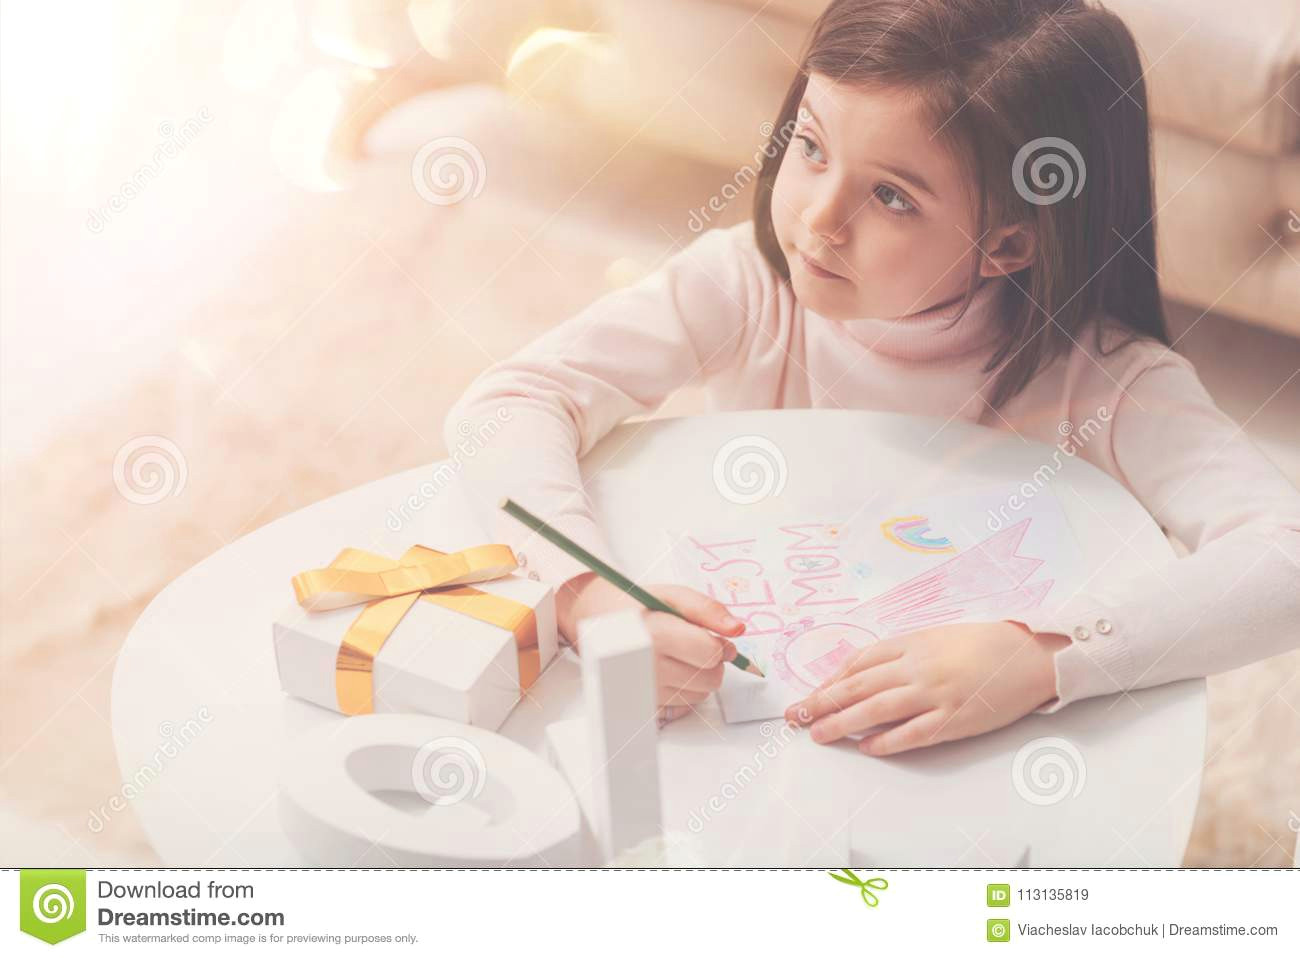 Drawing Of A Girl and Her Mom Caring Artistic Girl Making A Picture for Her Mom Stock Image